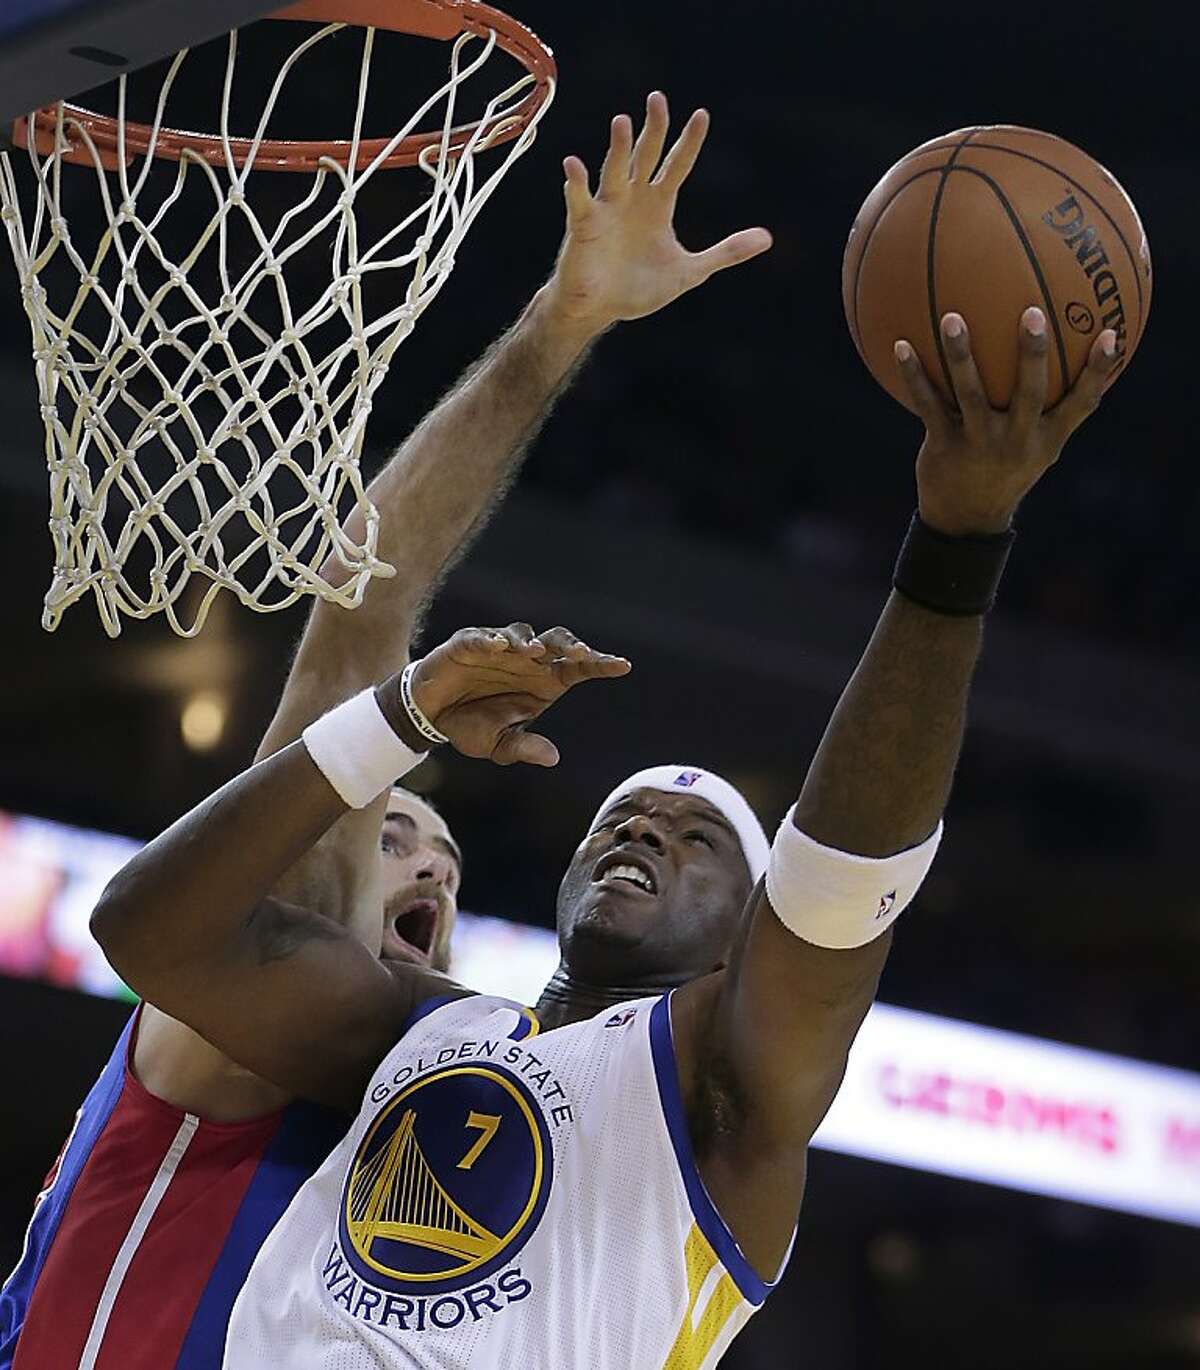 Golden State Warriors' Jermaine O'Neal, right, lays up a shot over Detroit Pistons' Luigi Datome during the second half of an NBA basketball game Tuesday, Nov. 12, 2013, in Oakland, Calif. (AP Photo/Ben Margot)